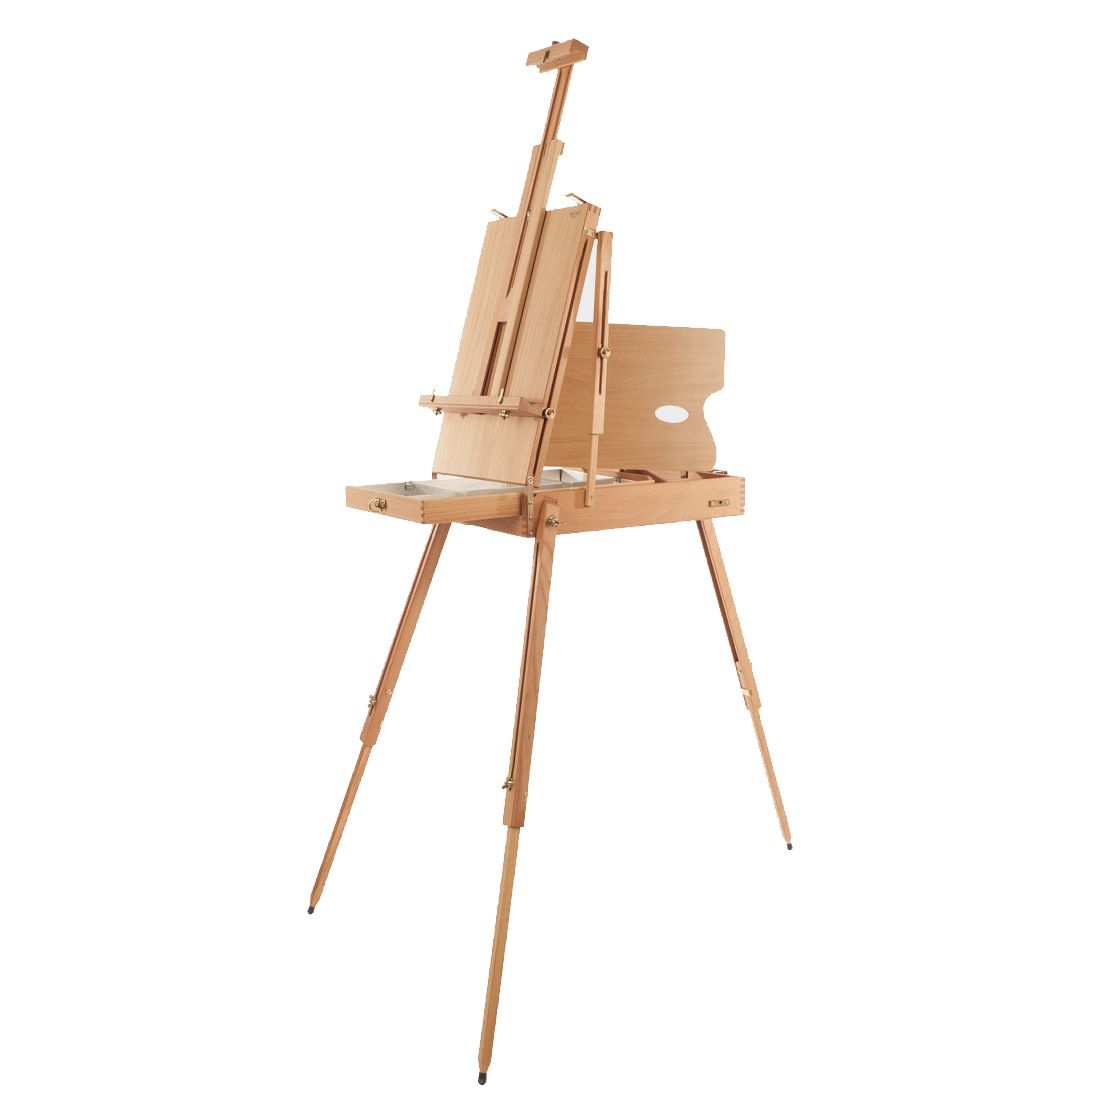 Mabef M-22 Big French Easel with Palette/Cover